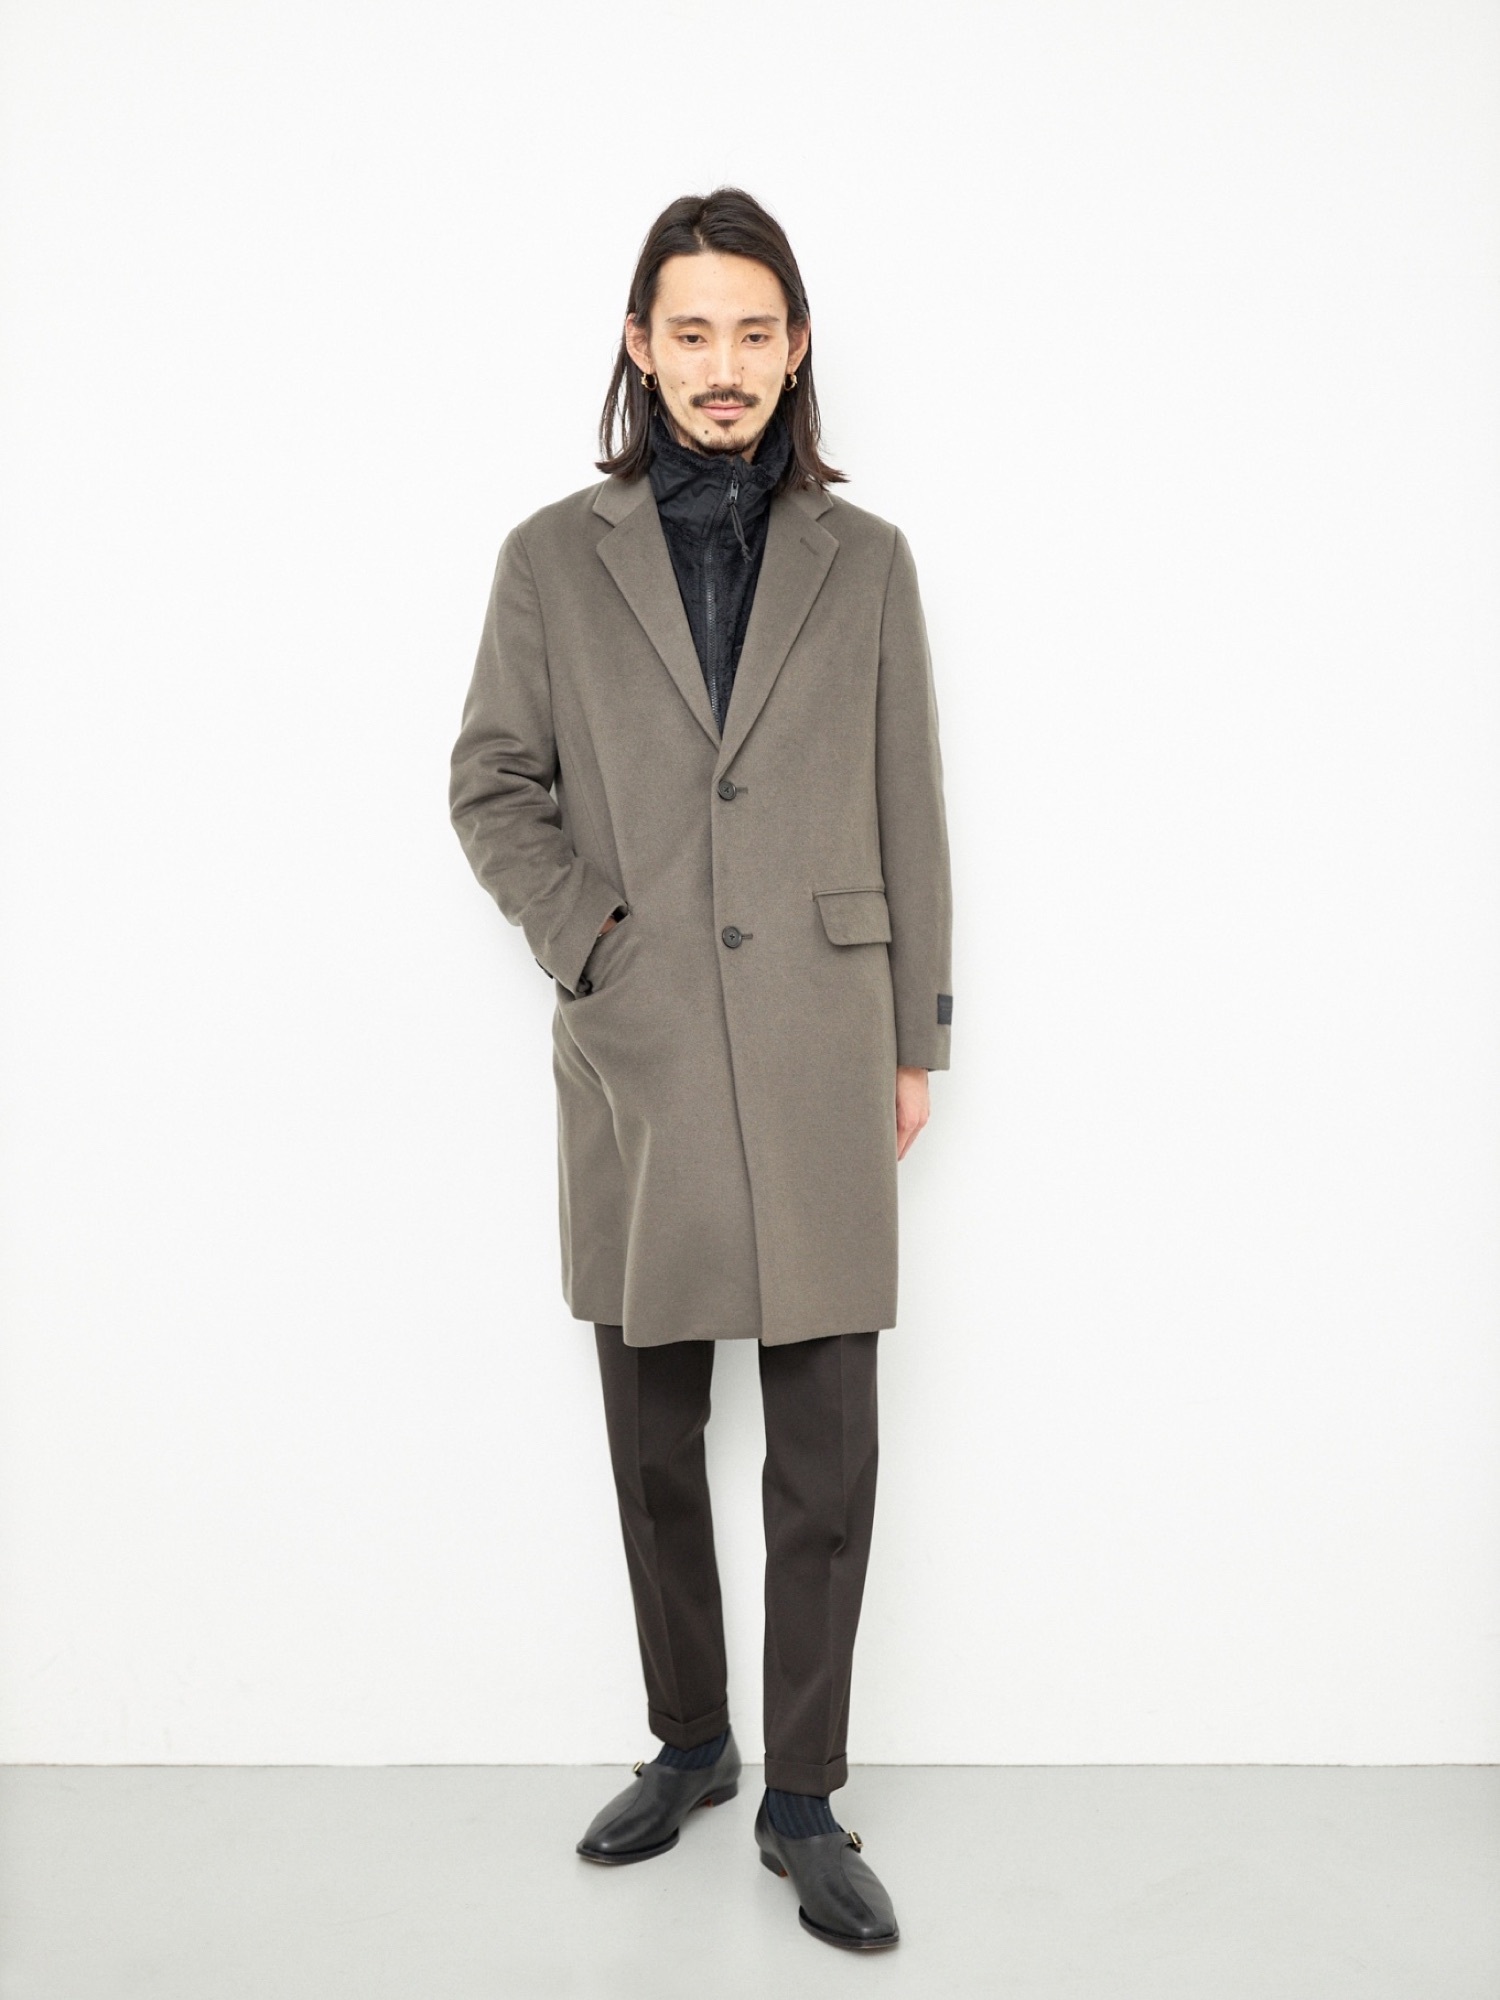 【URBAN RESEARCHMen’s trench coat  L-size